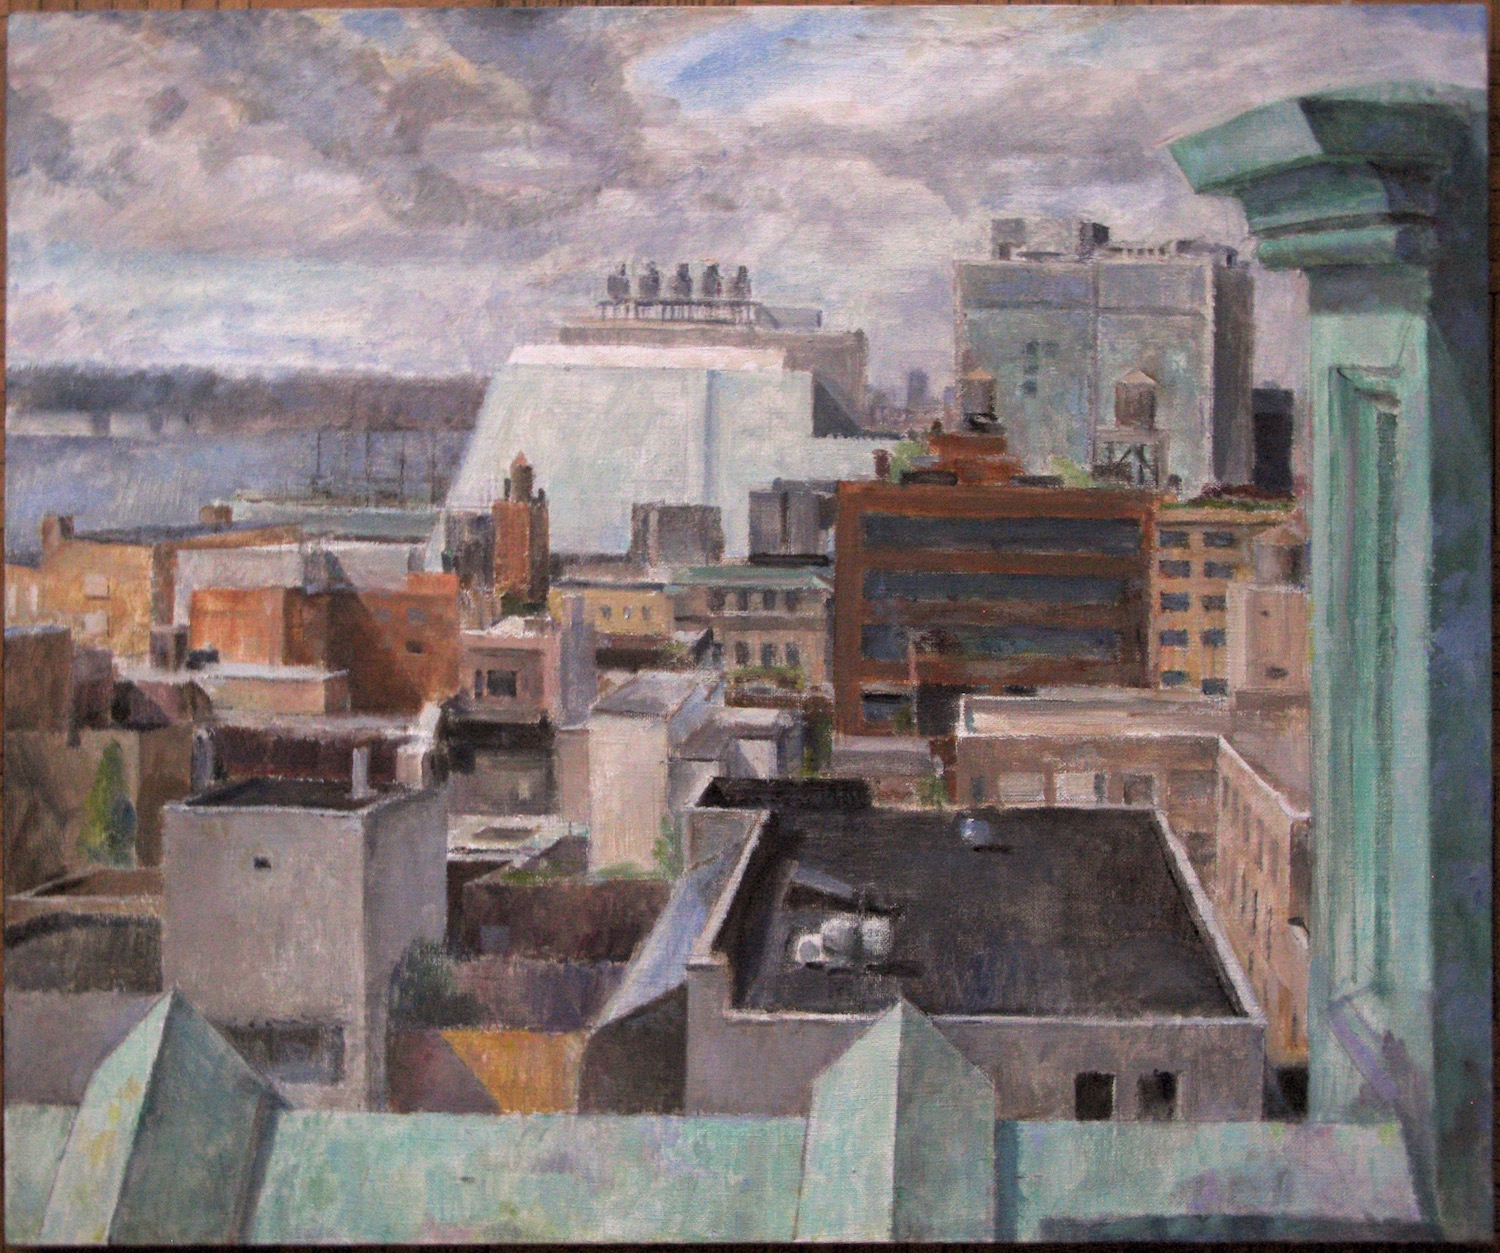 West Village Roof View, 30 x 36 inches, oil on linen, 2017.